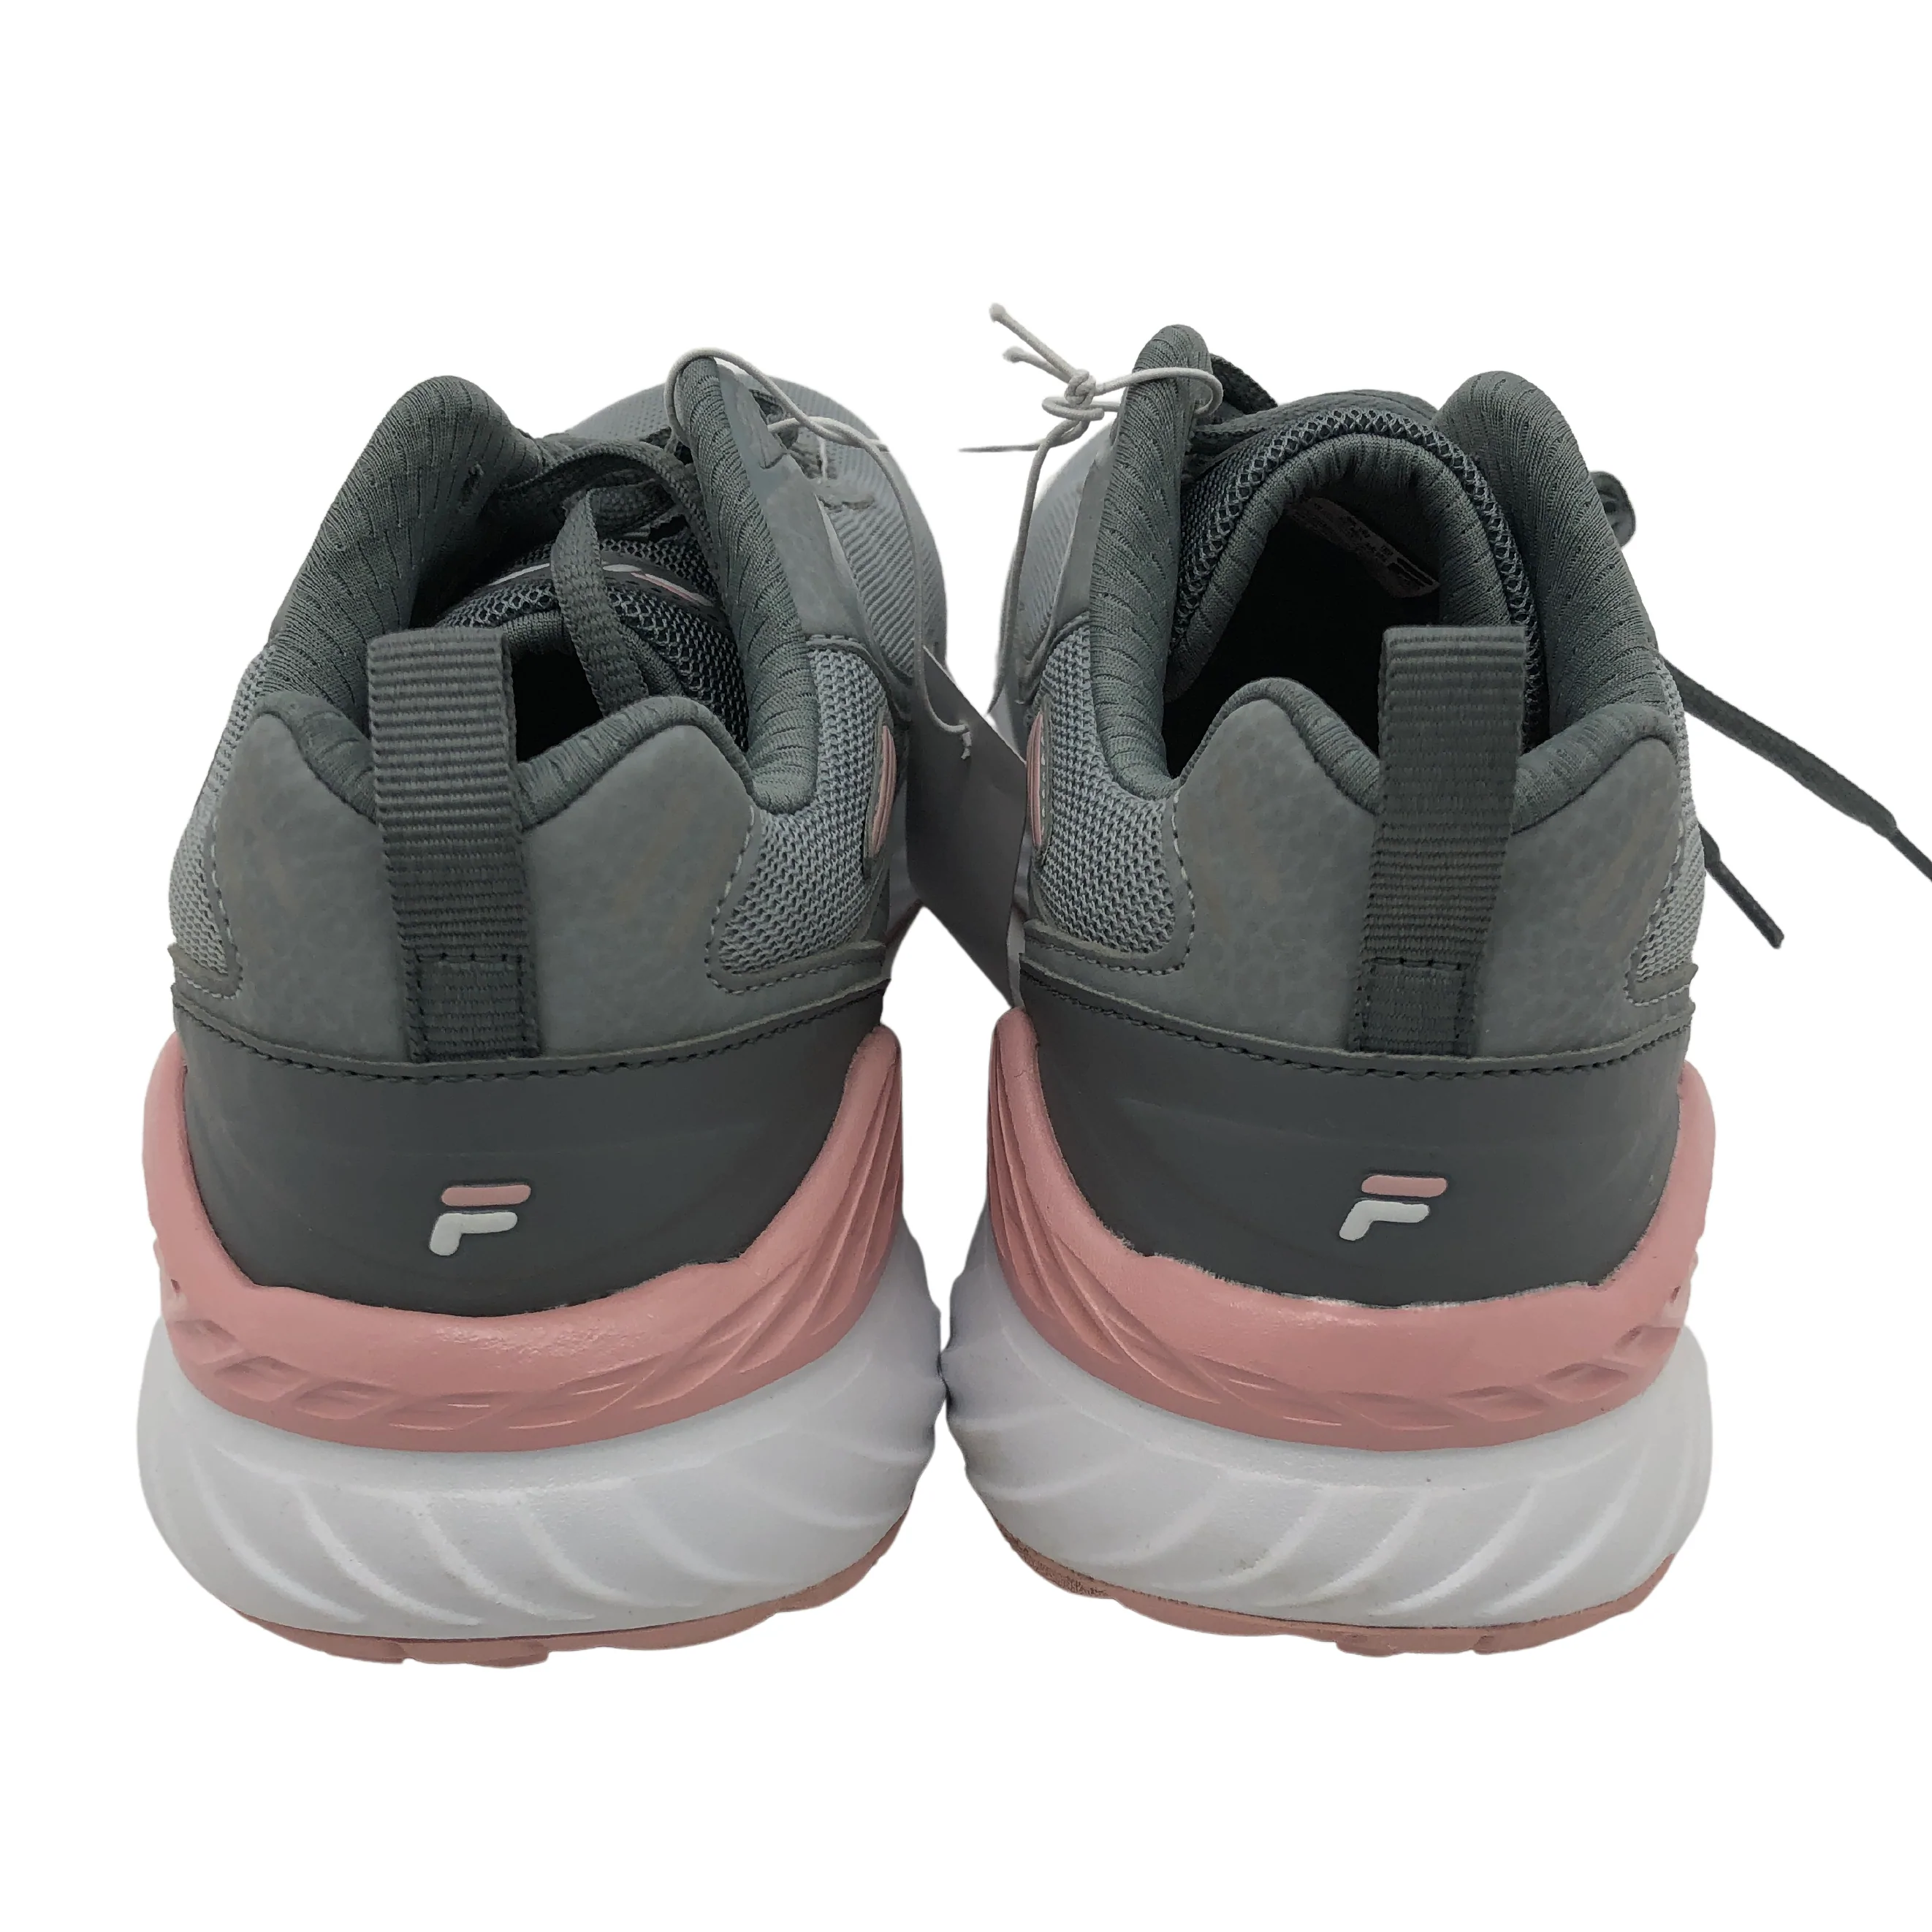 Fila Women's Running Shoes / Trazoros Energized 2 / Grey with Pink / Size 5